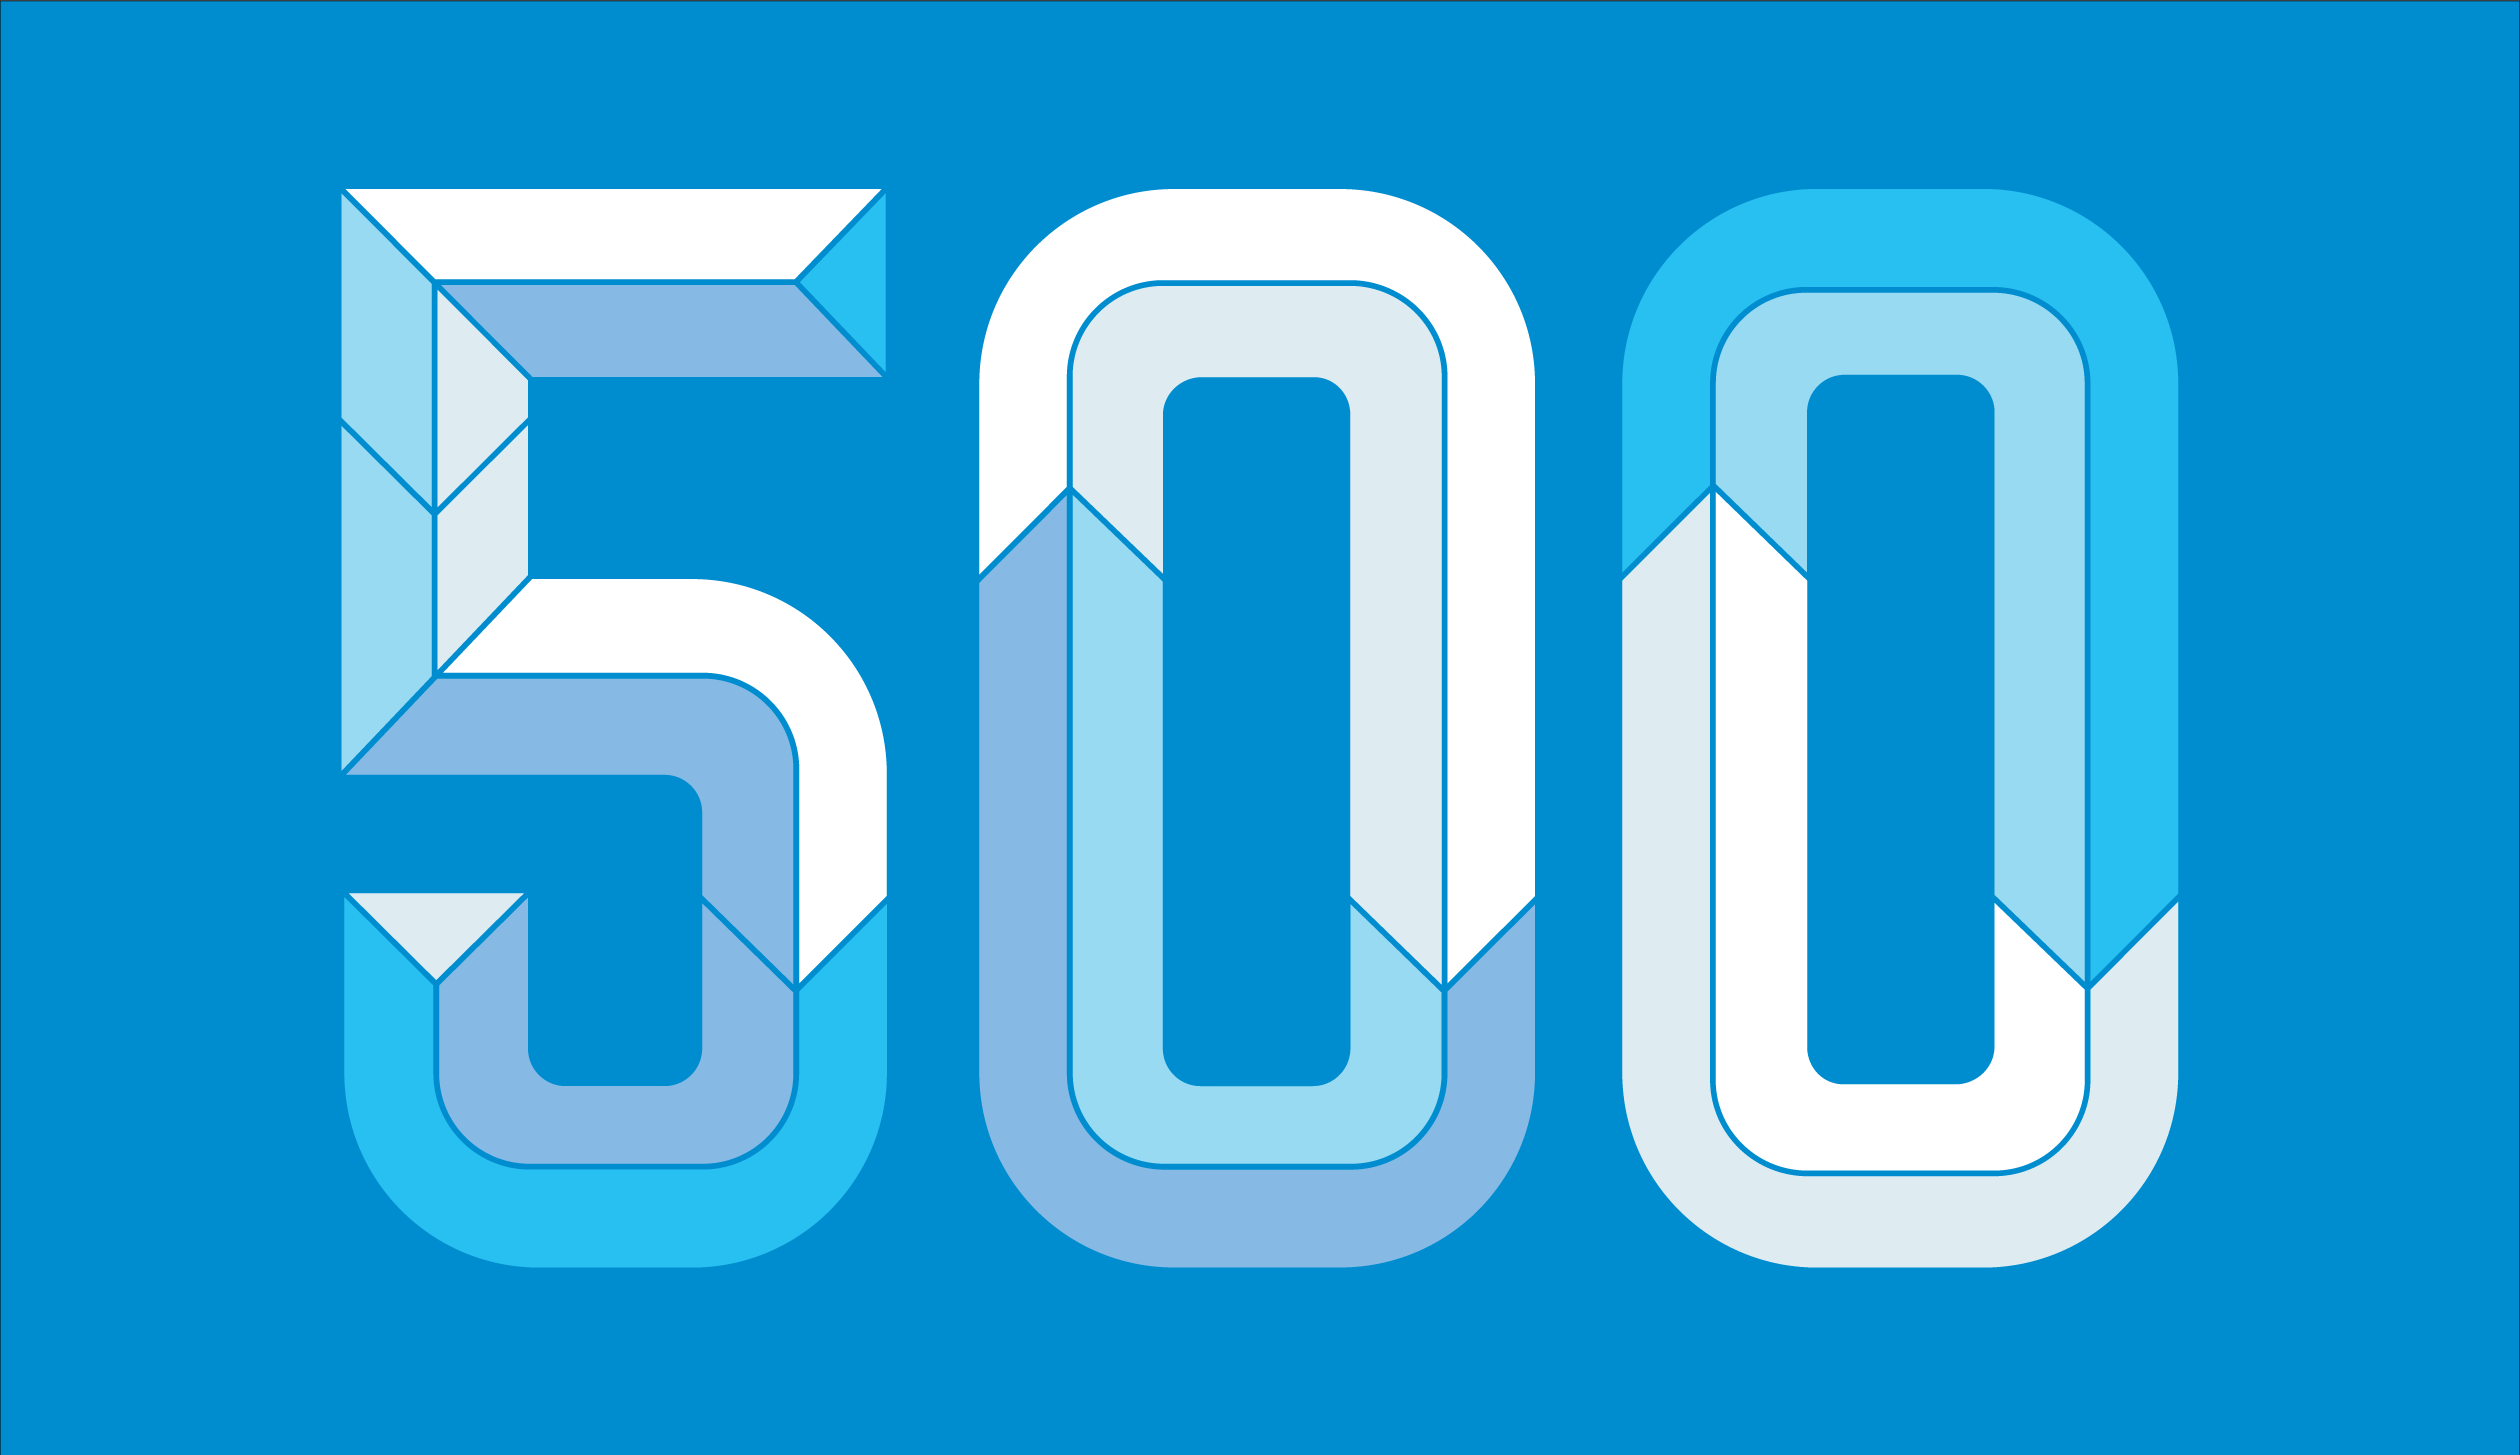 Fortune 500 Logo - Fortune 500 Companies 2017: Who Made the List